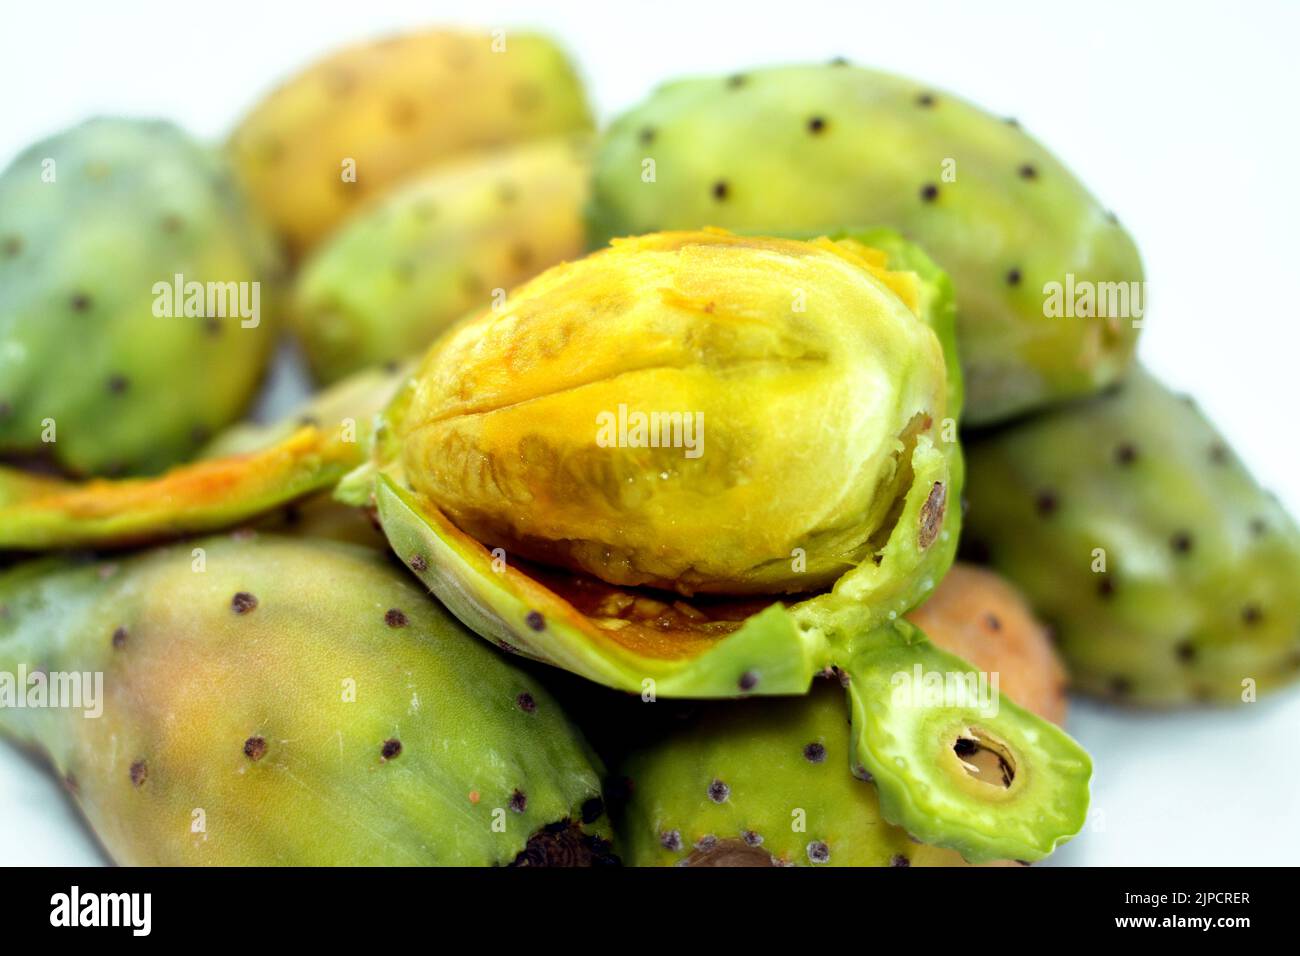 Pile of fresh prickly pear fruit isolated on white background, selective focus, Opuntia, commonly called prickly pear, Barbary fig, tuna fruit, sabra Stock Photo